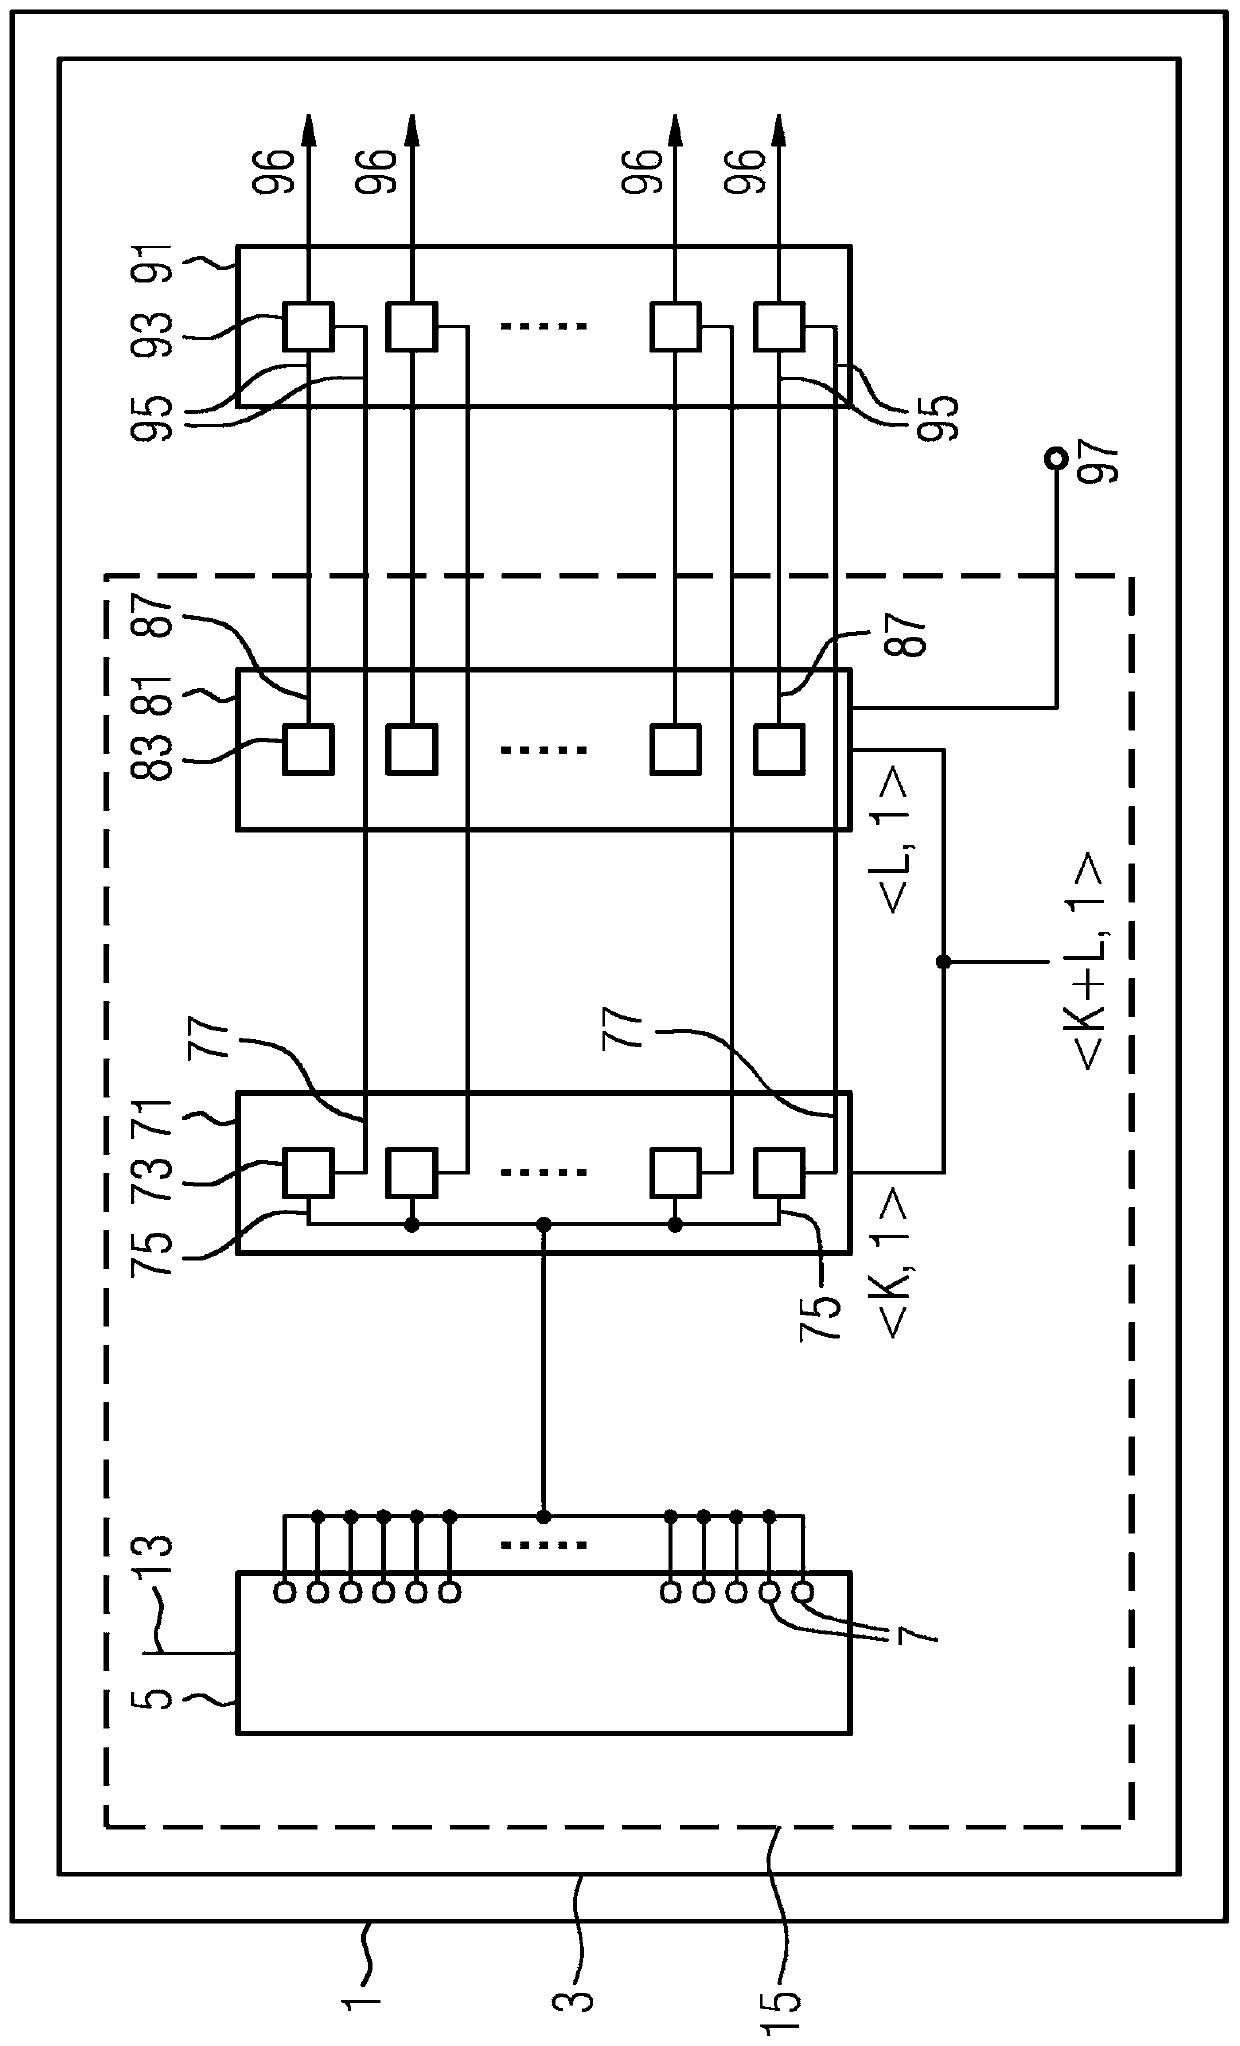 Digital-to-analog converter for multi-threshold counters that divide bits between resistor ladders and comparators